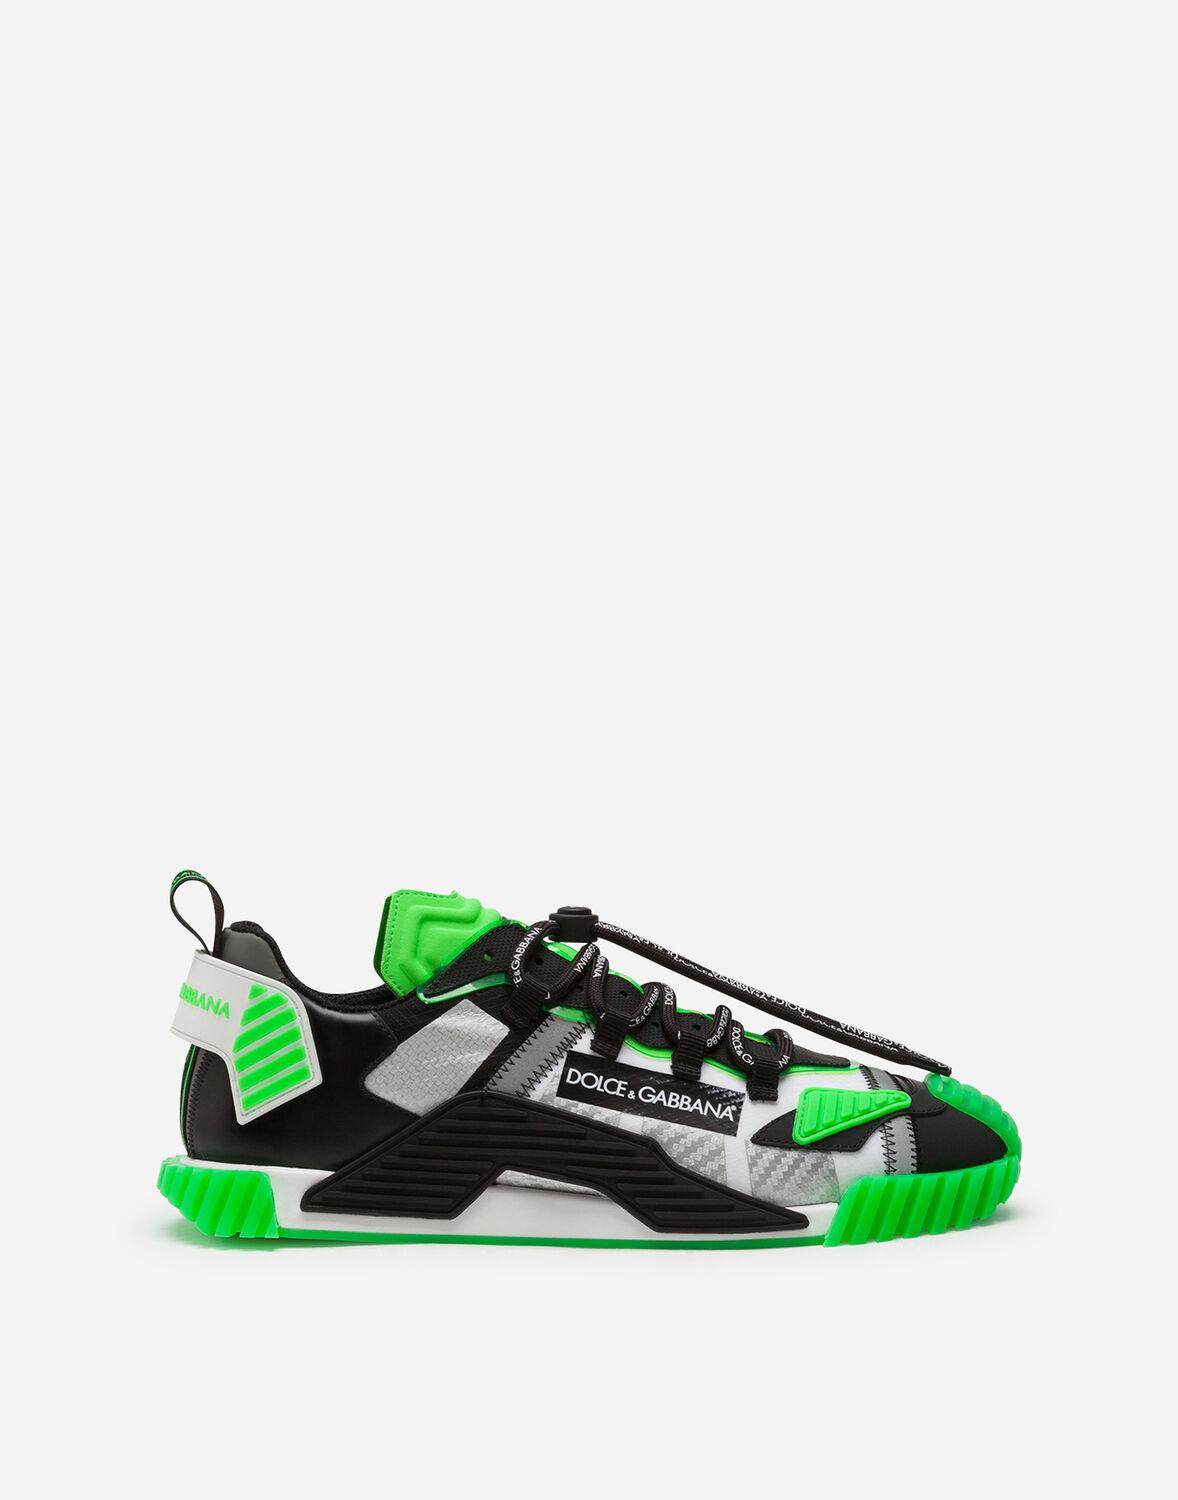 Dolce & Gabbana Ns1 Sneakers In Mixed Materials in Green for Men | Lyst